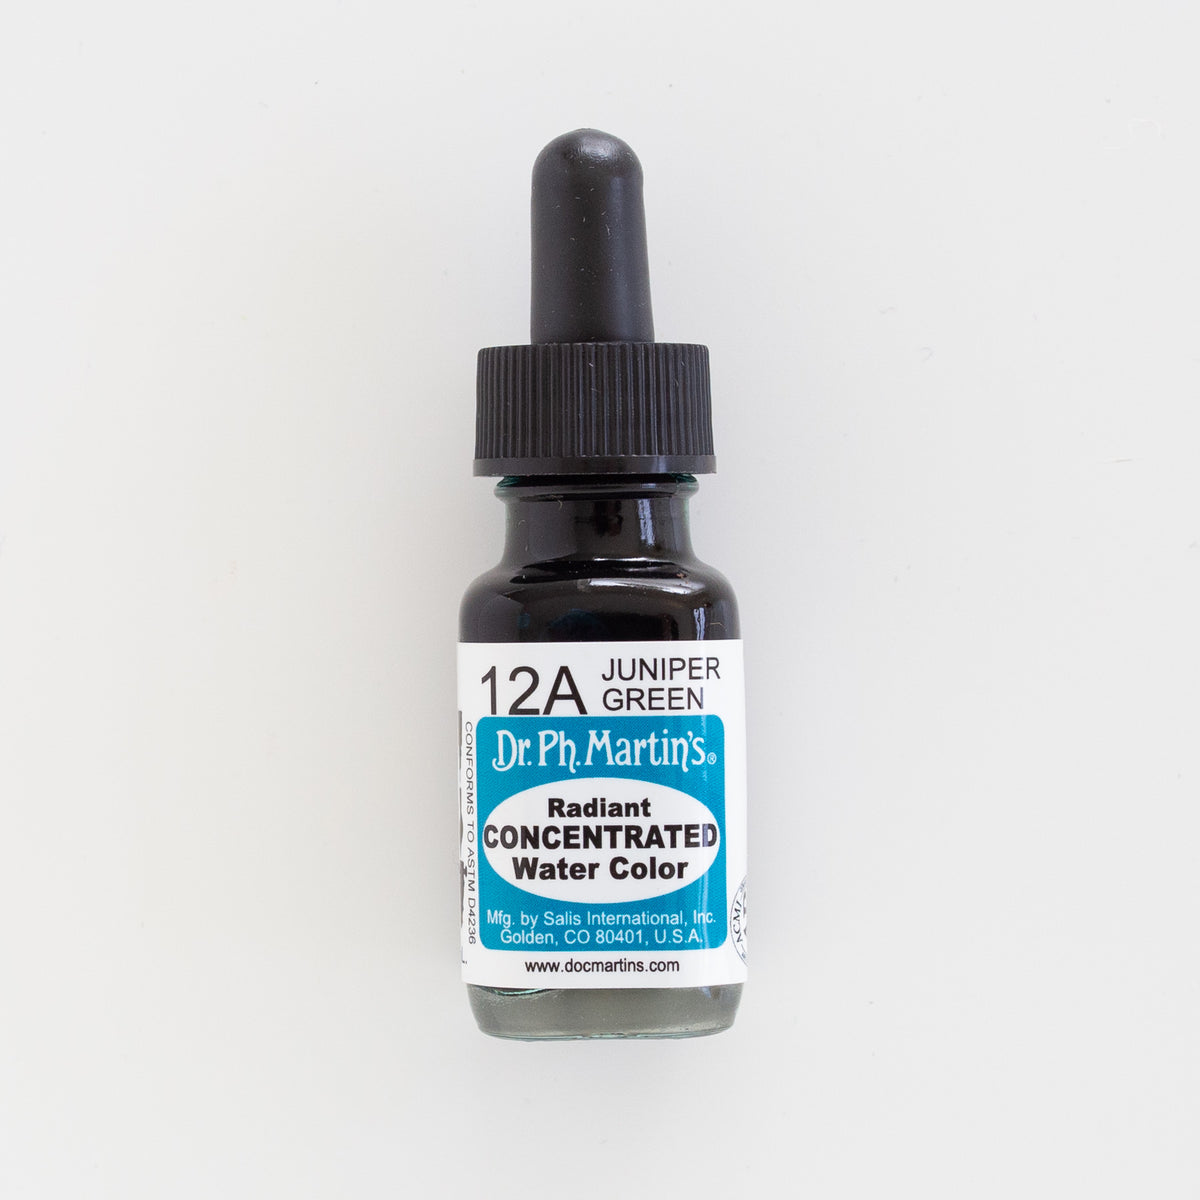 Dr. Ph. Martin’s Radiant Concentrated 12A Juniper Green